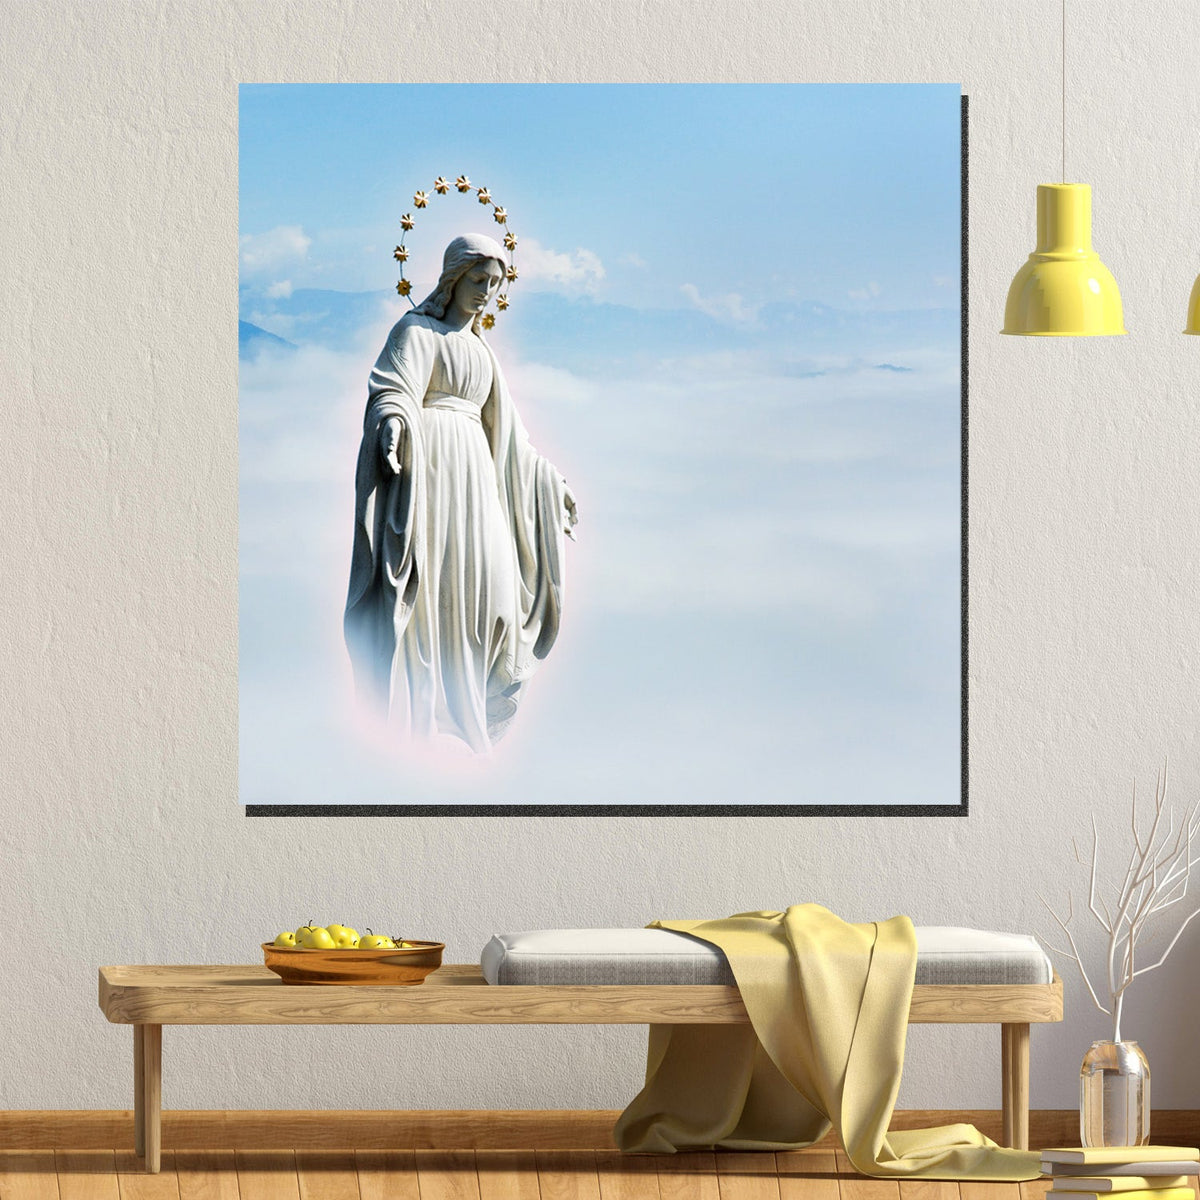 https://cdn.shopify.com/s/files/1/0387/9986/8044/products/StatueofMaryCanvasArtprintStretched-2.jpg